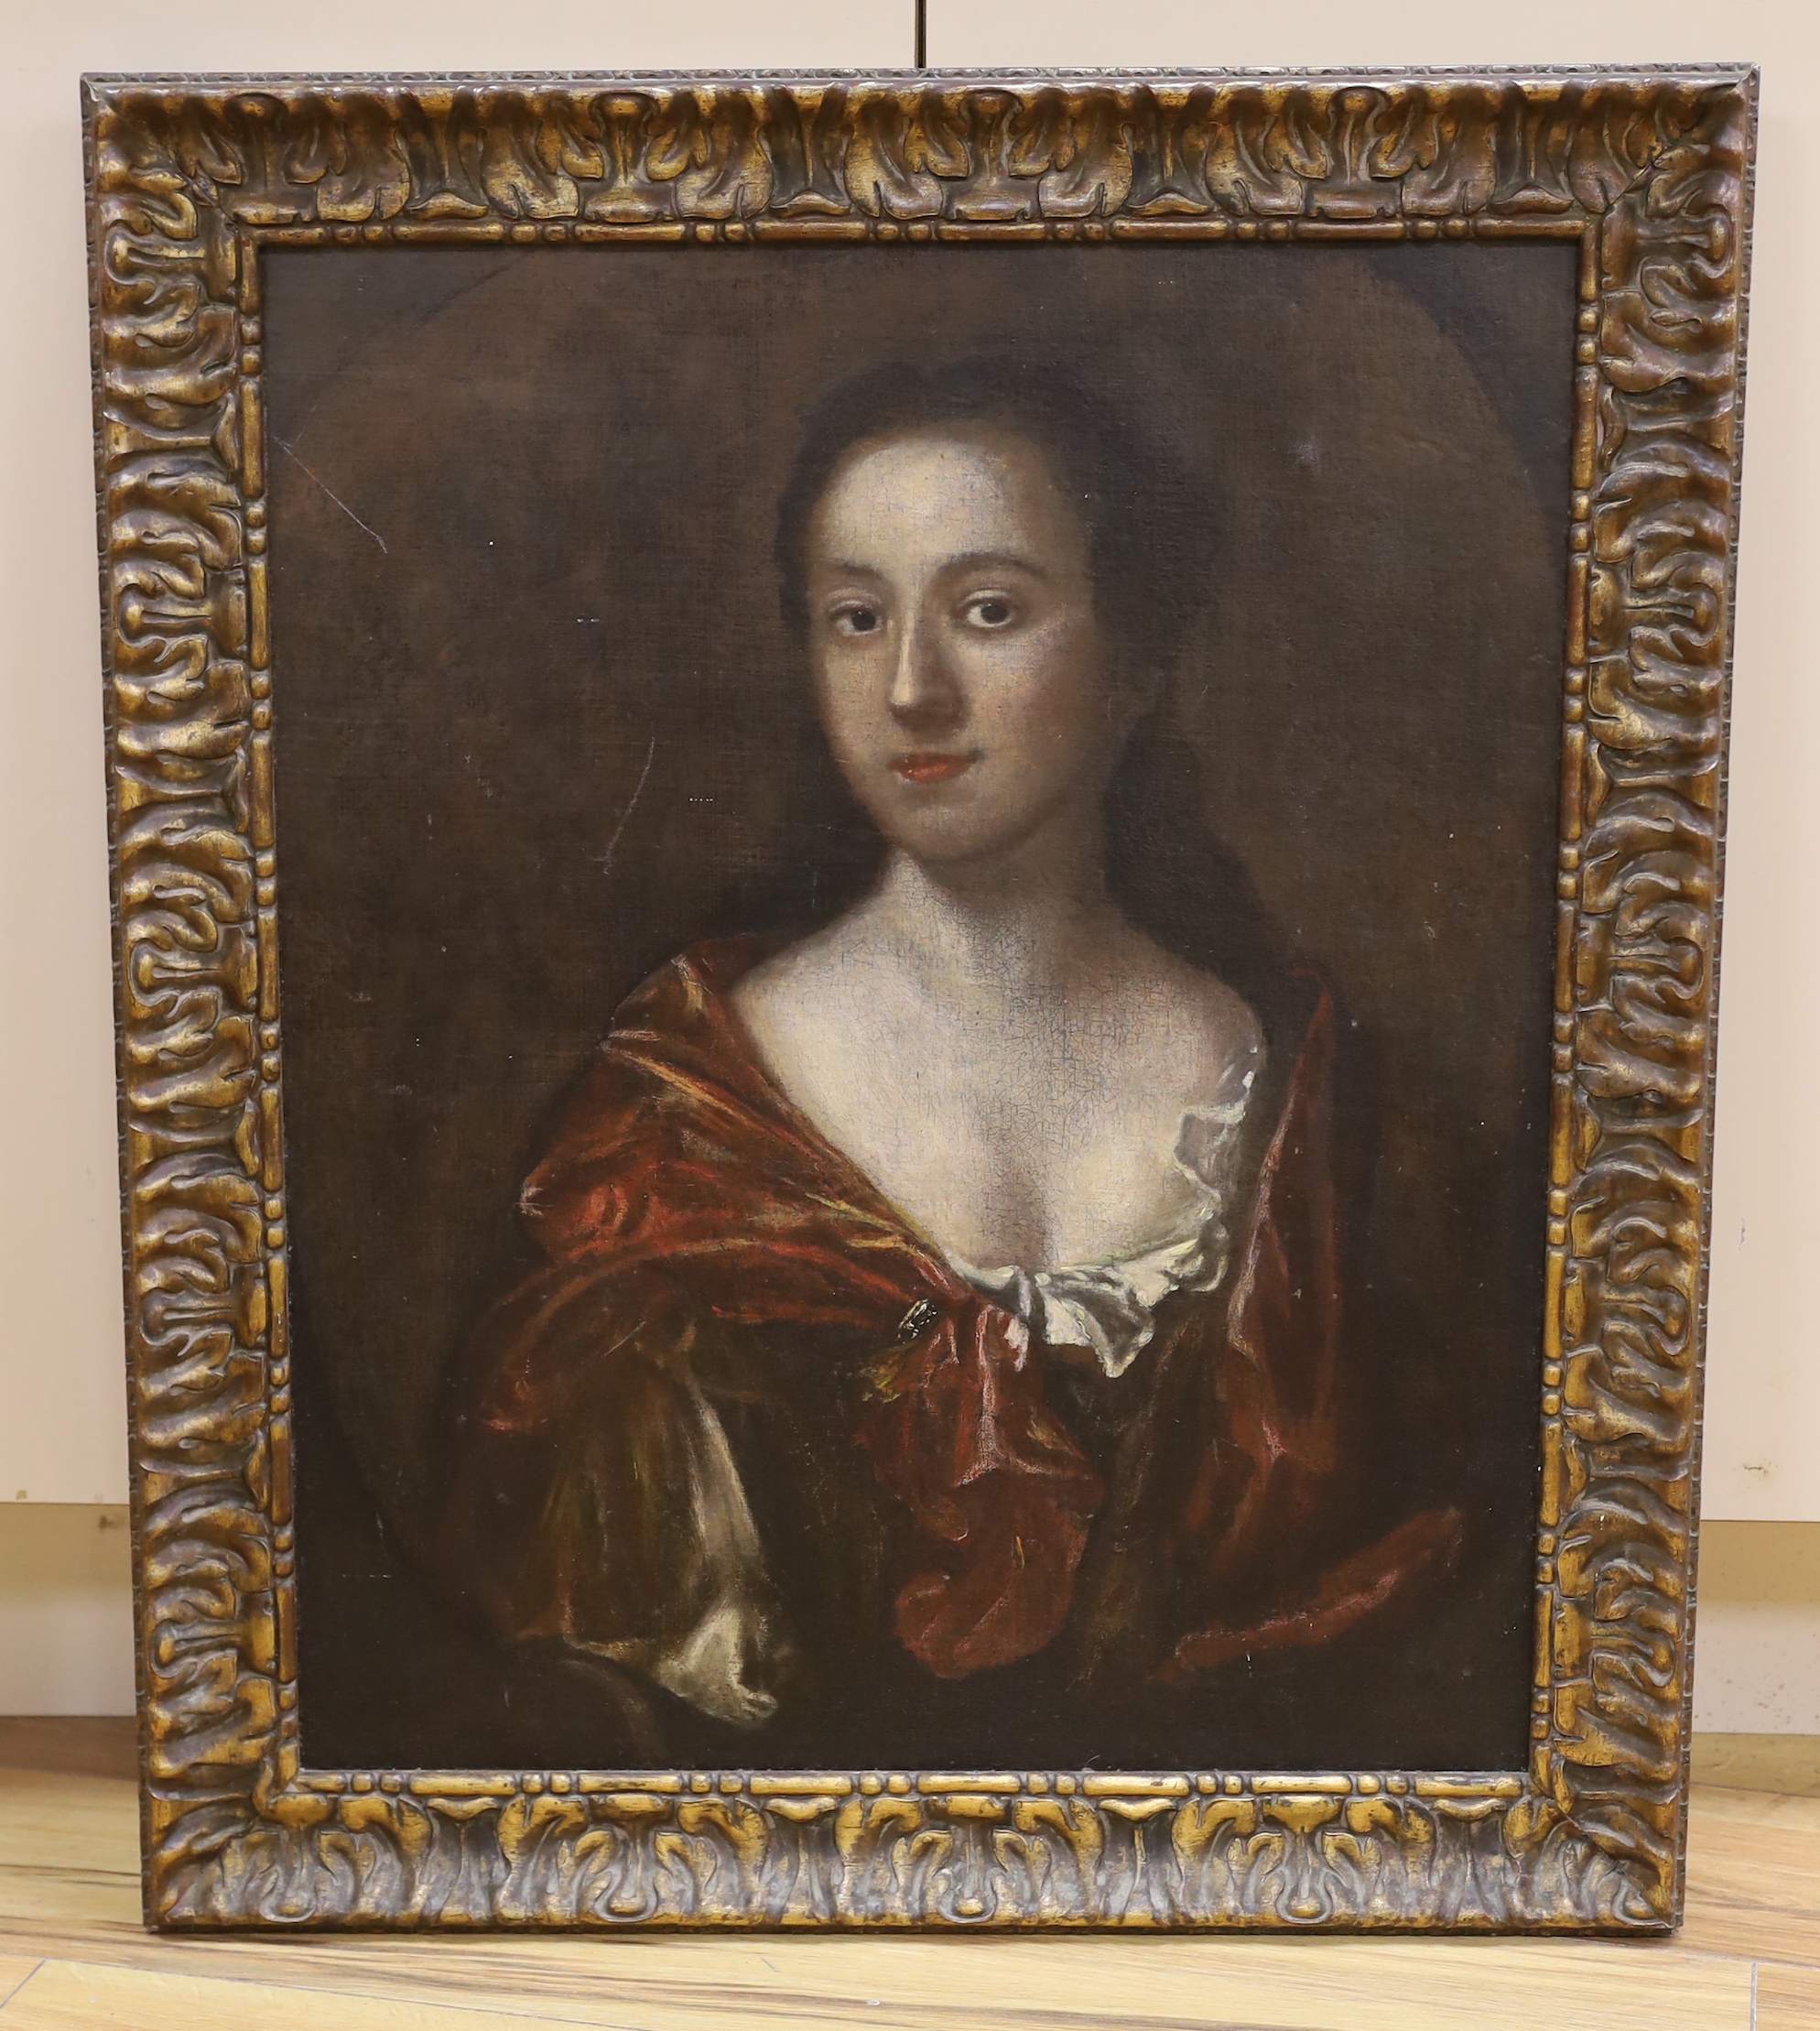 18th century English School, oil on canvas, Portrait of a lady, feigned oval, 63 x 52cm